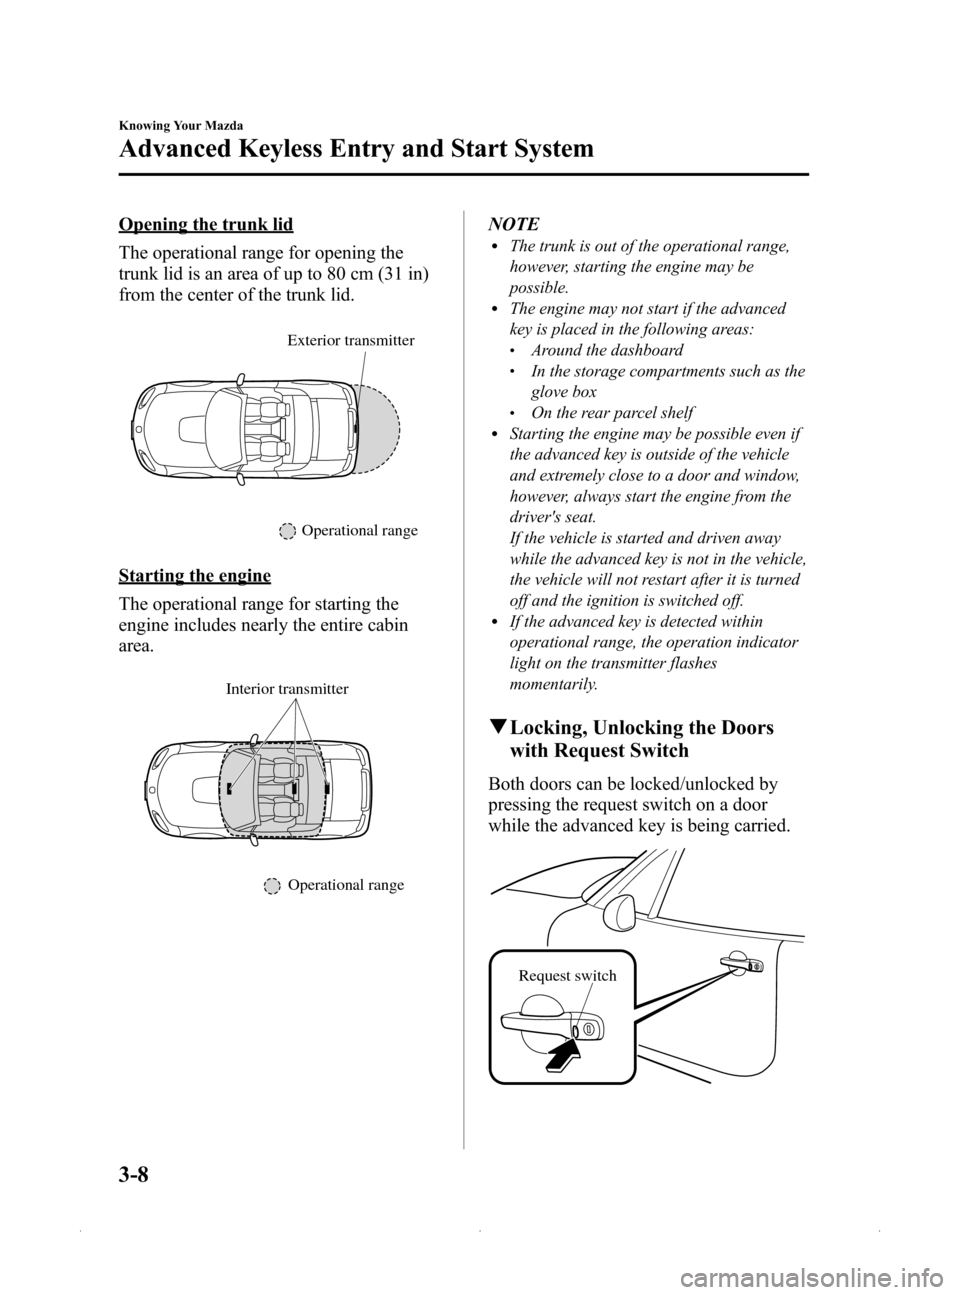 MAZDA MODEL MX-5 2015  Owners Manual (in English) Black plate (62,1)
Opening the trunk lid
The operational range for opening the
trunk lid is an area of up to 80 cm (31 in)
from the center of the trunk lid.
Exterior transmitter
Operational range
Star